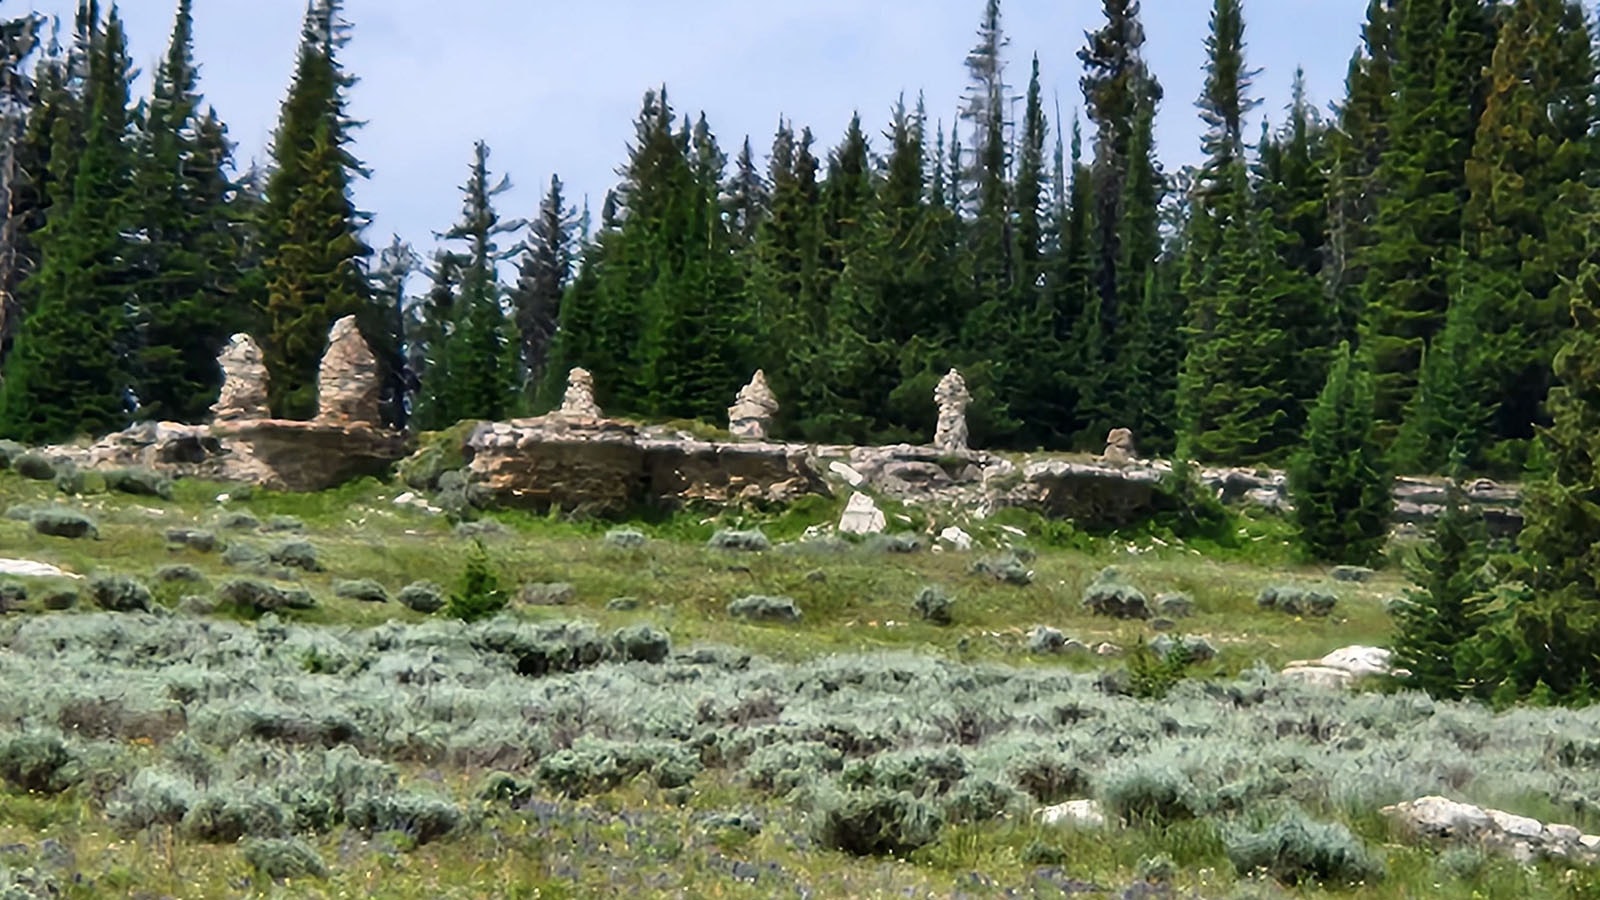 There are rules for cairns in the Bighorn National Forest.